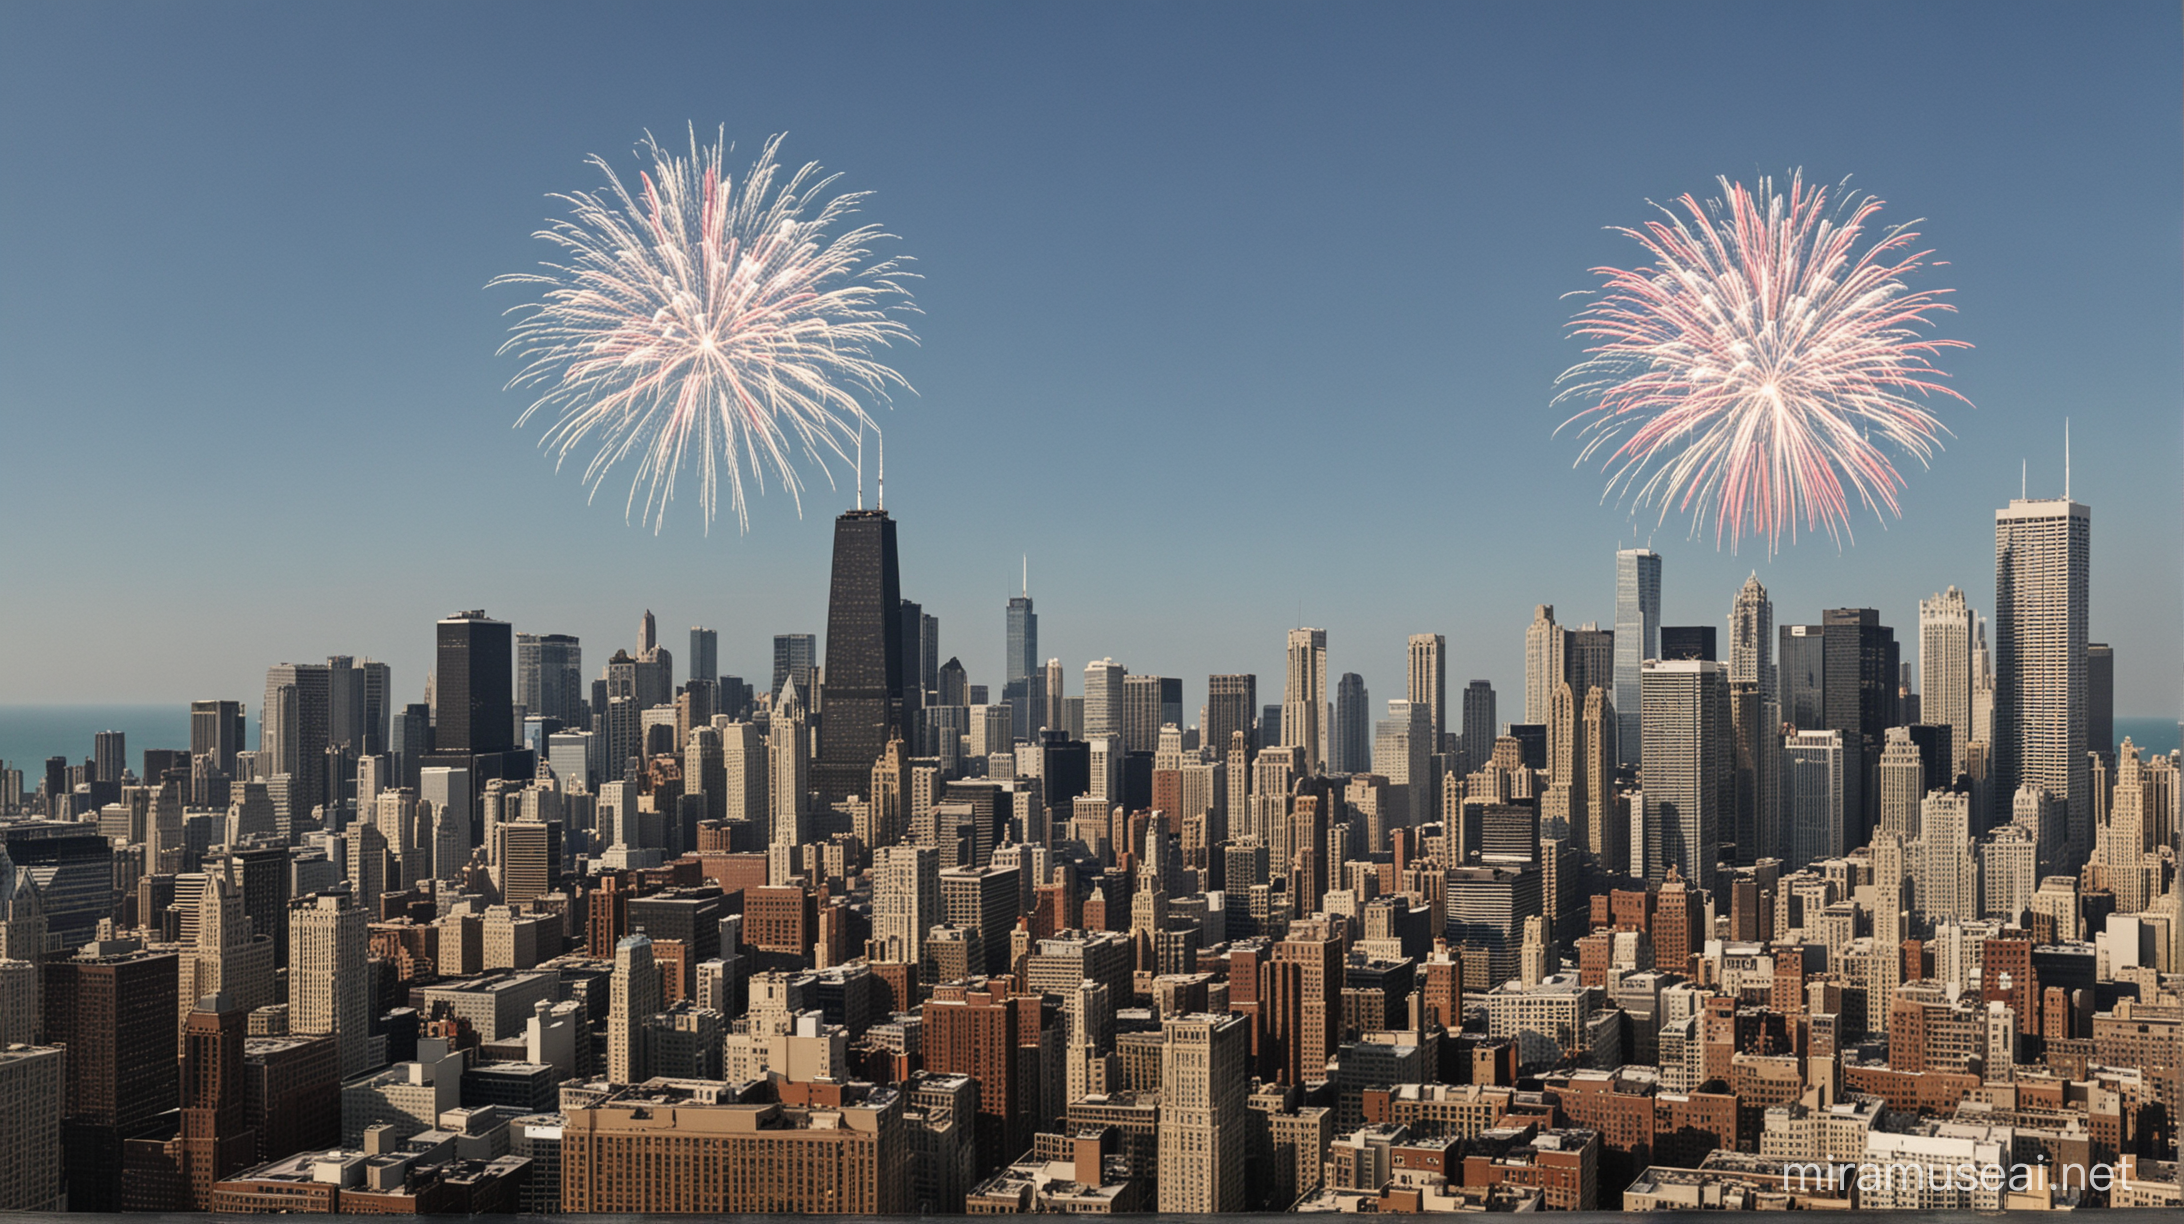 during the day, blue sky, chicago skyline, rooftop view, 4th of July, american flag, fireworks